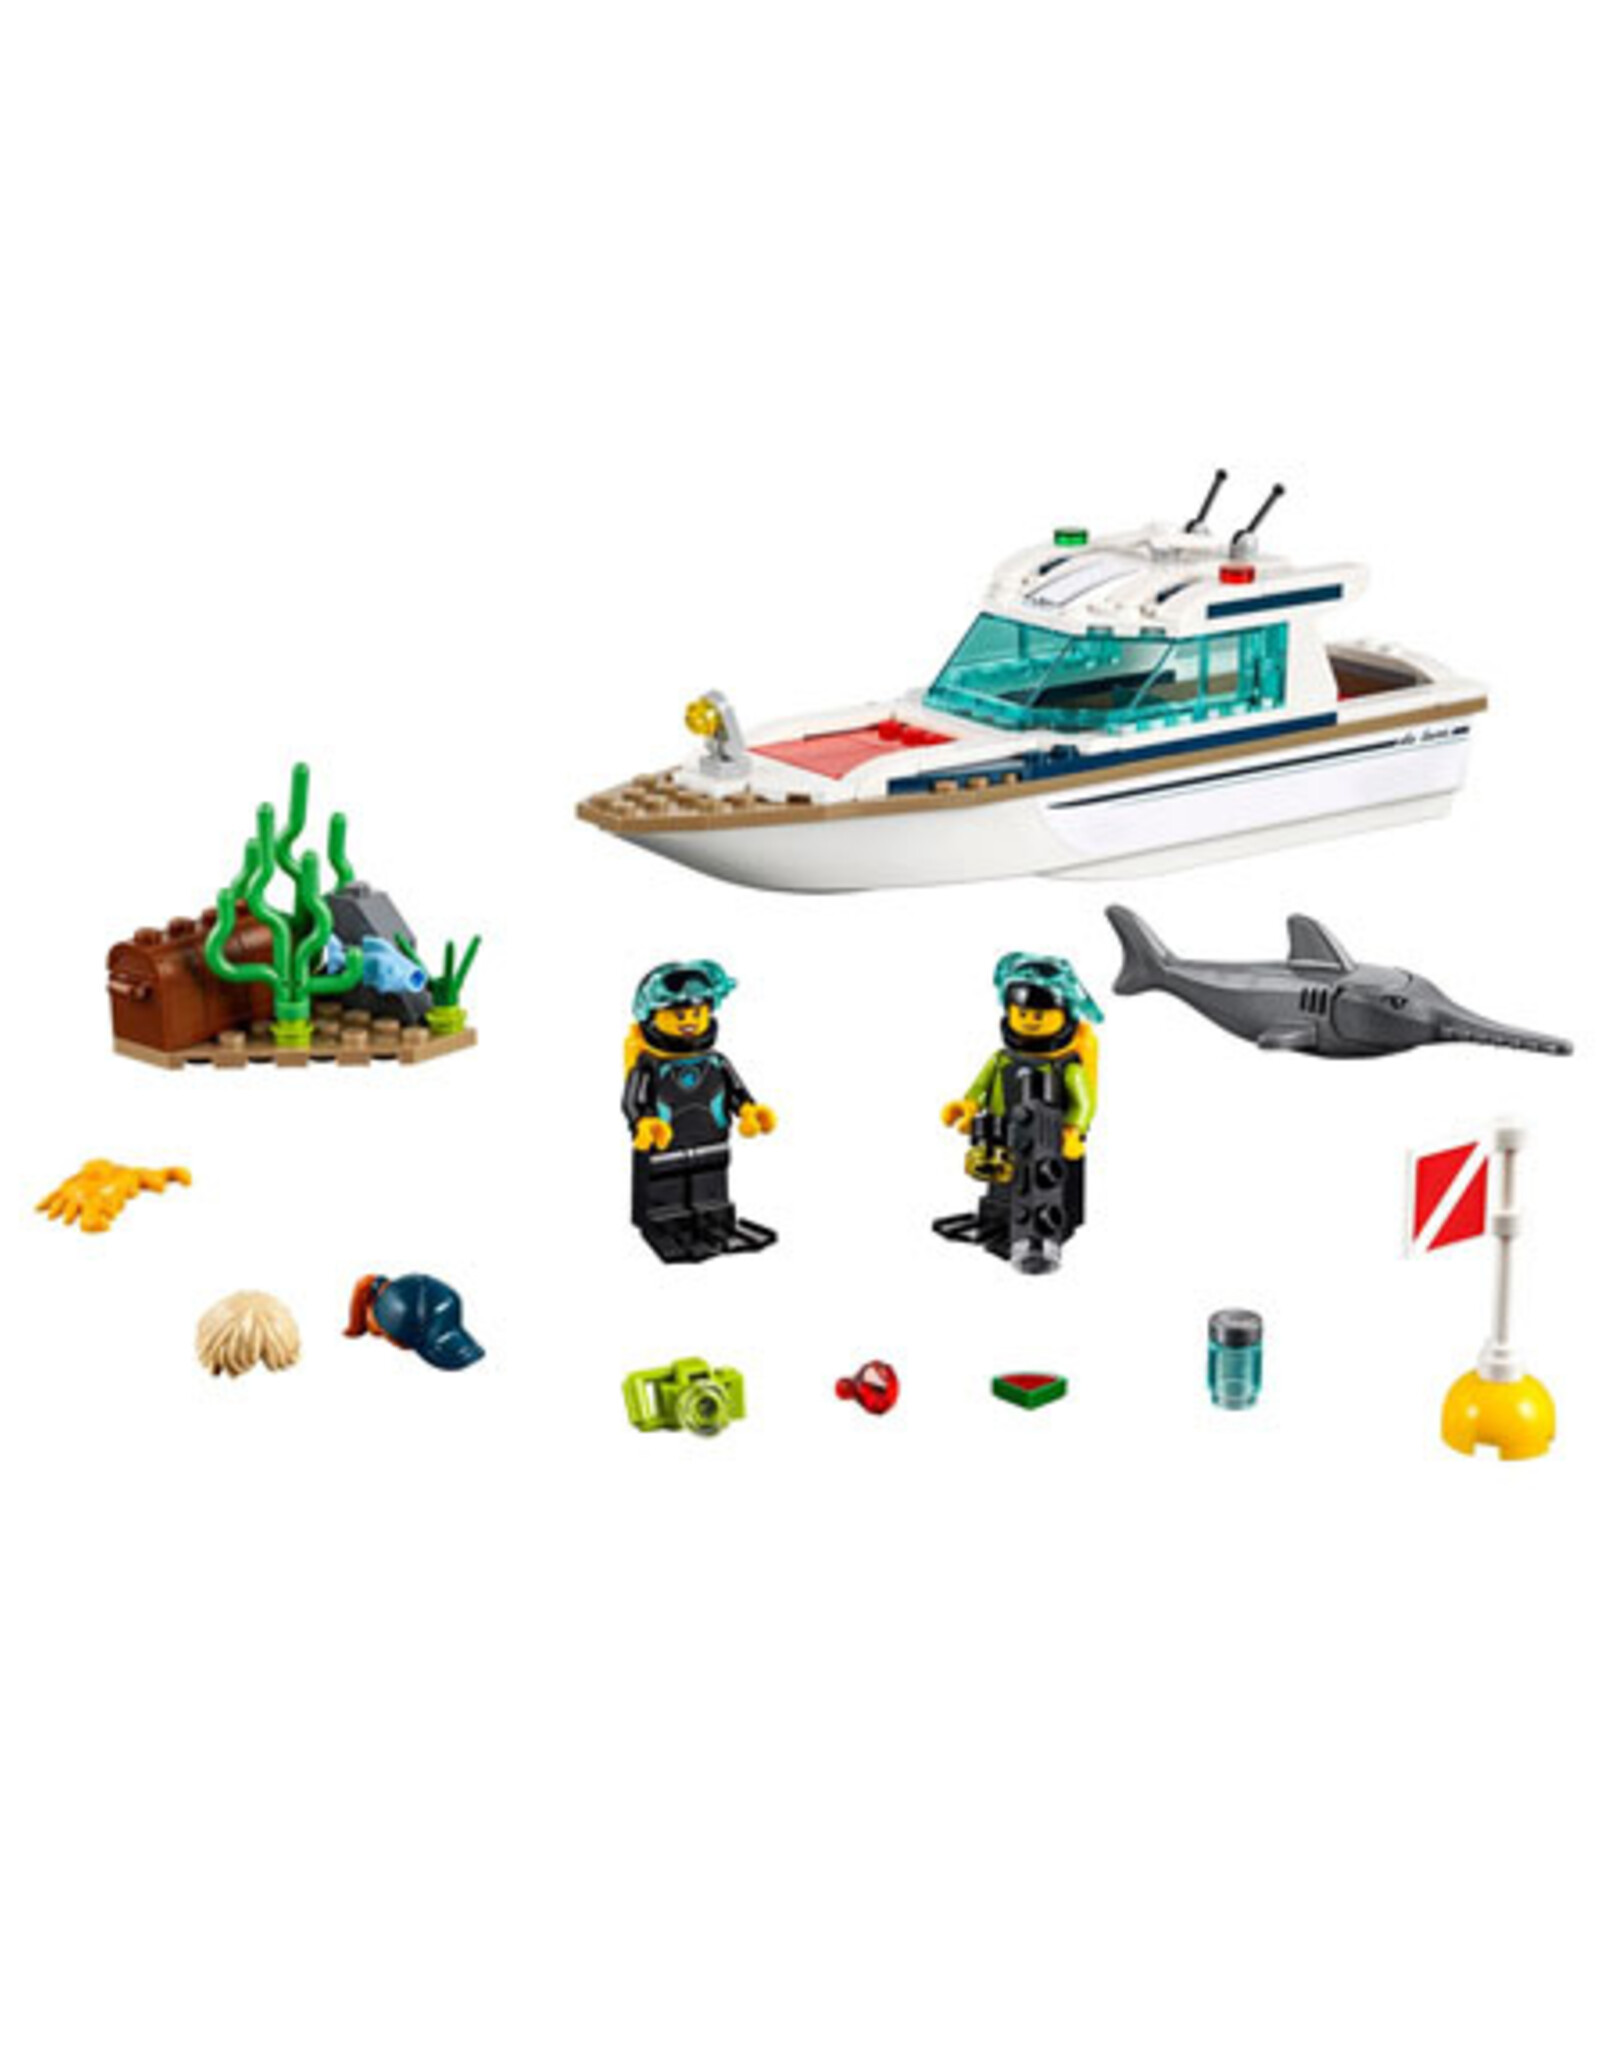 LEGO LEGO 60221 Diving Yacht CITY